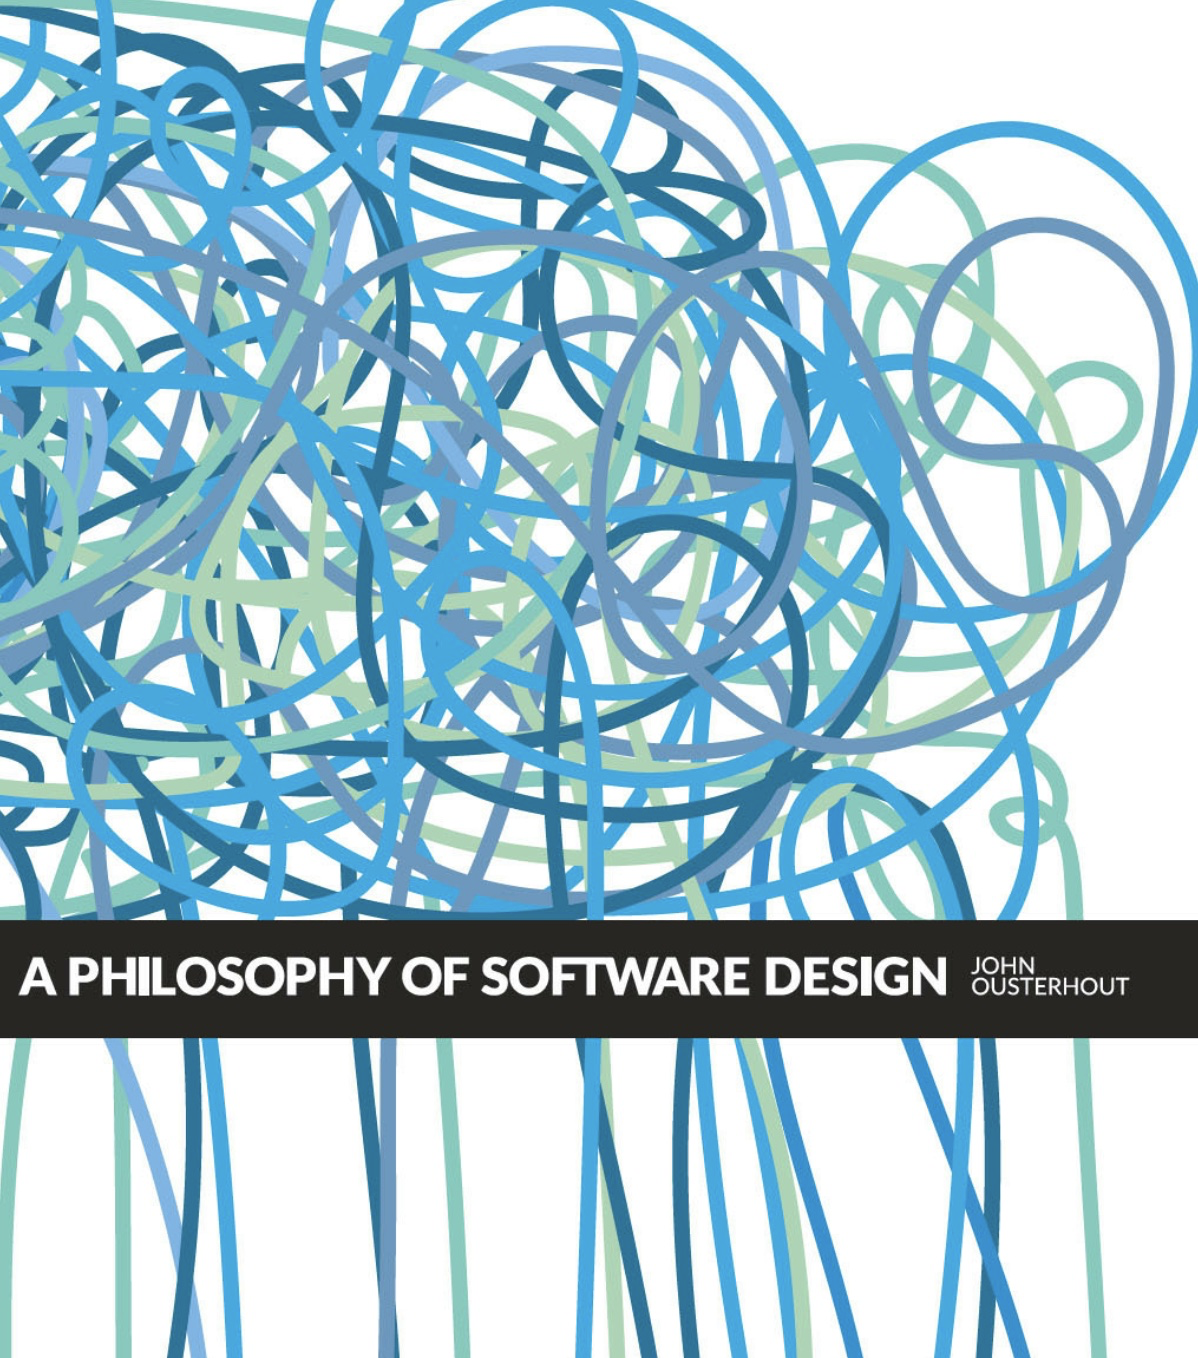 Book Cover of “A Philosophy of Software Design”